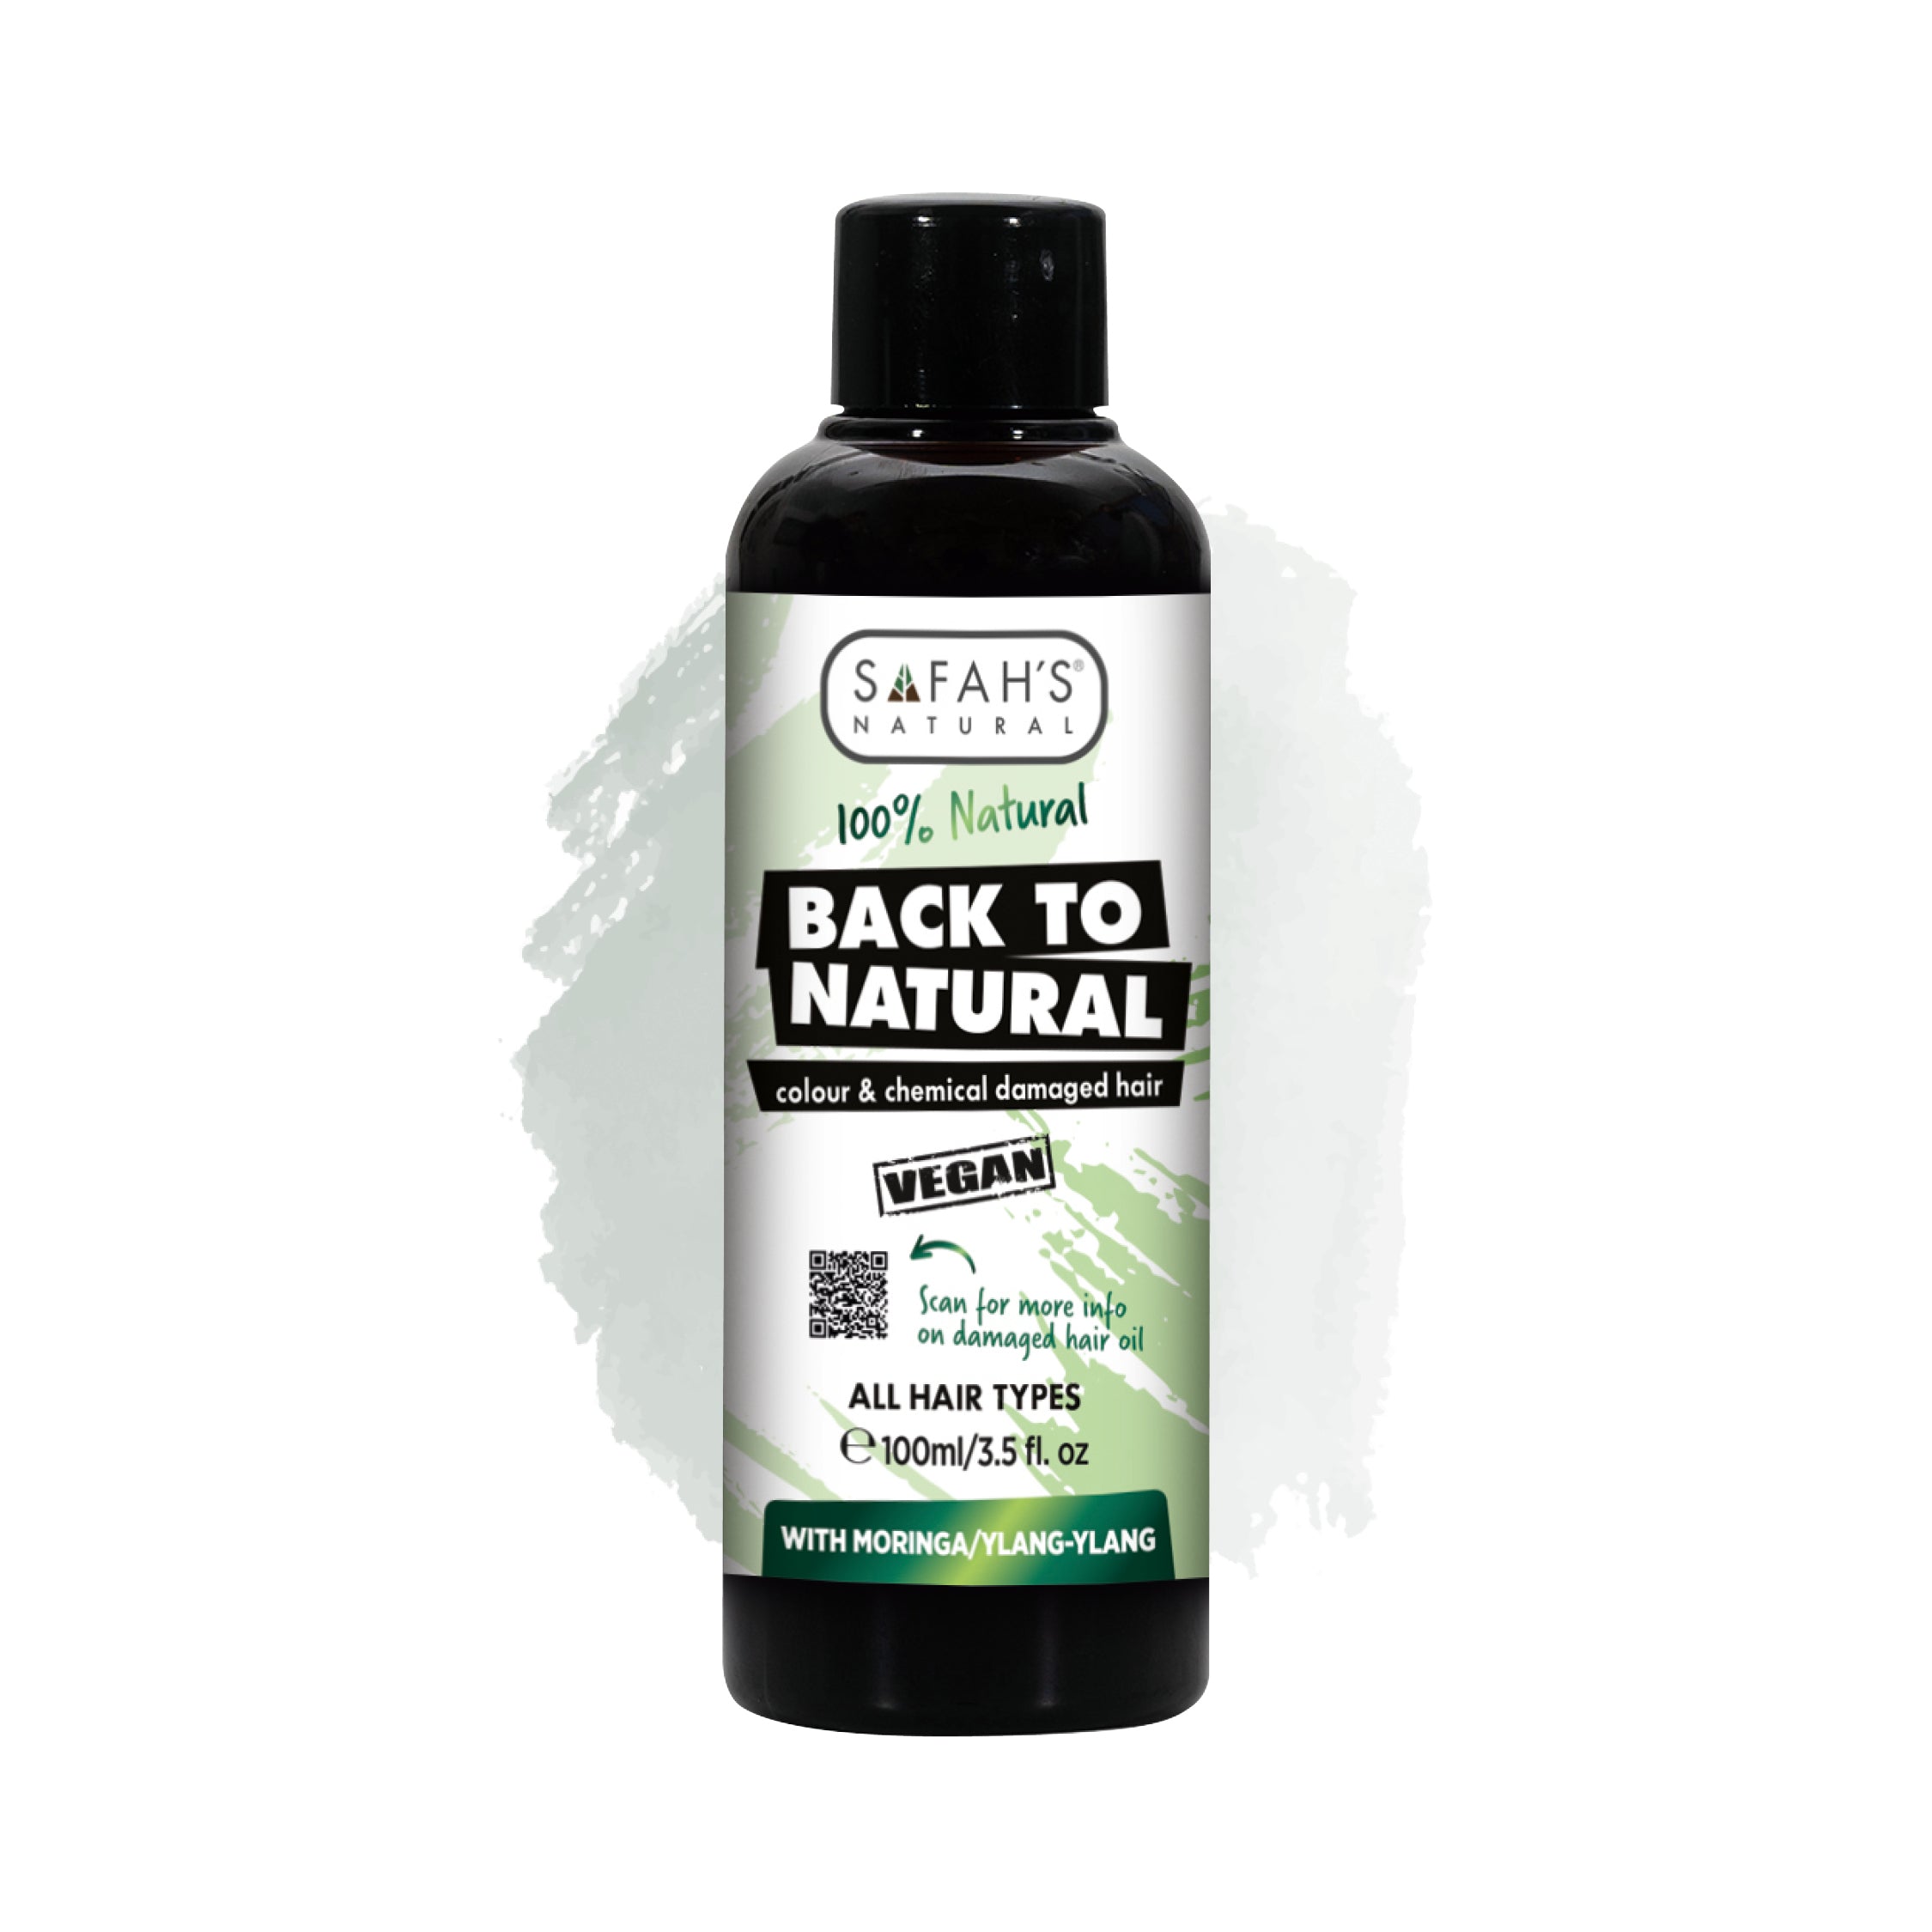 Back To Natural (Damaged hair) oil